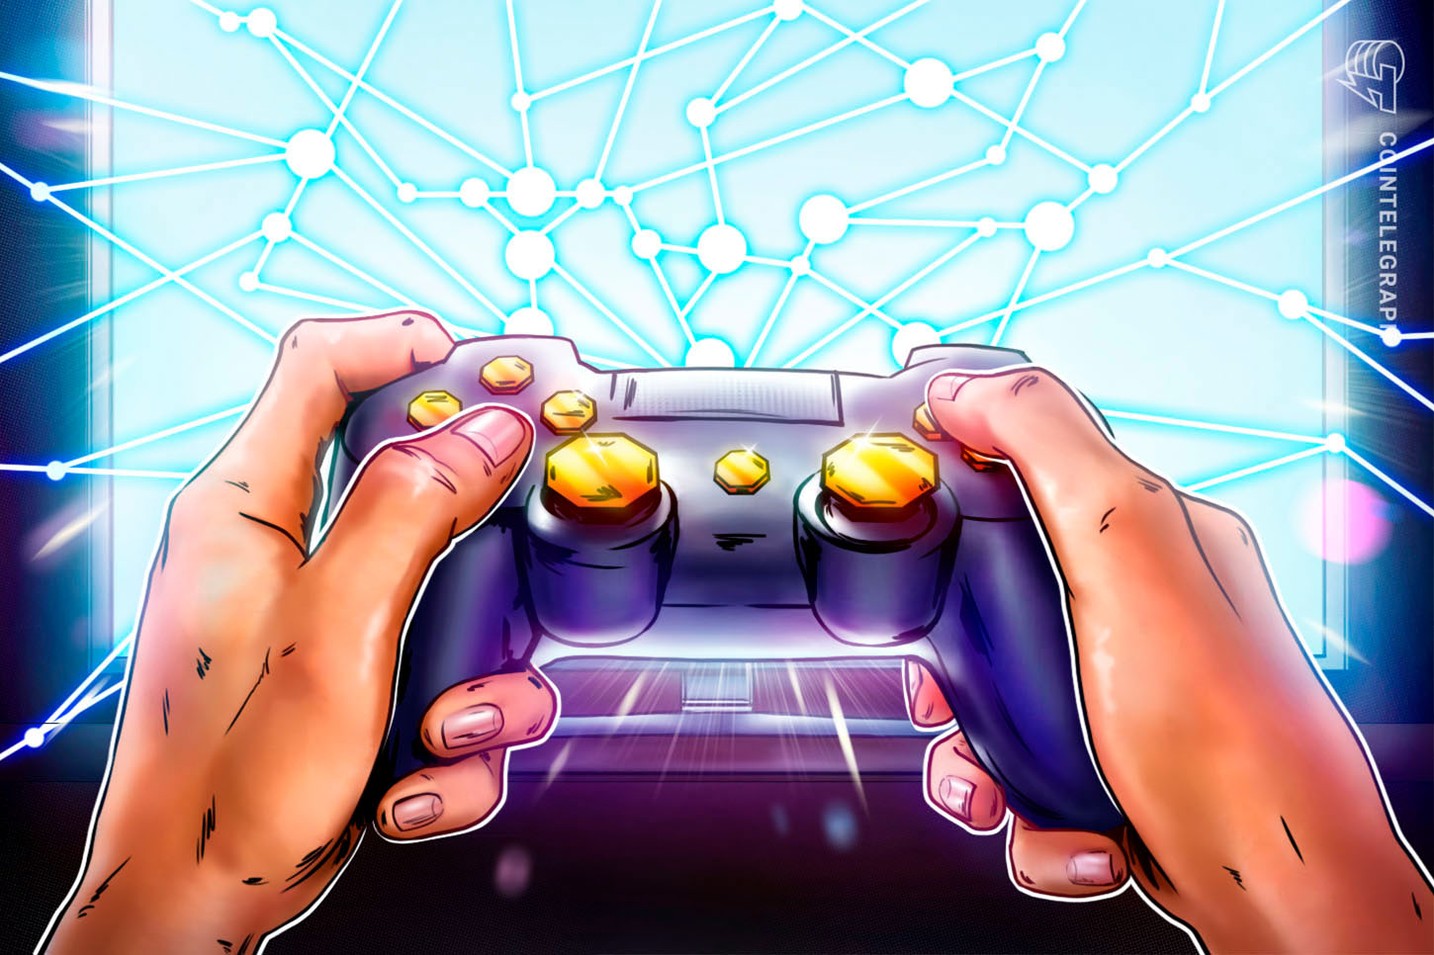 Asia’s current gaming domination ‘crucial’ for Web3 games: DappRadar